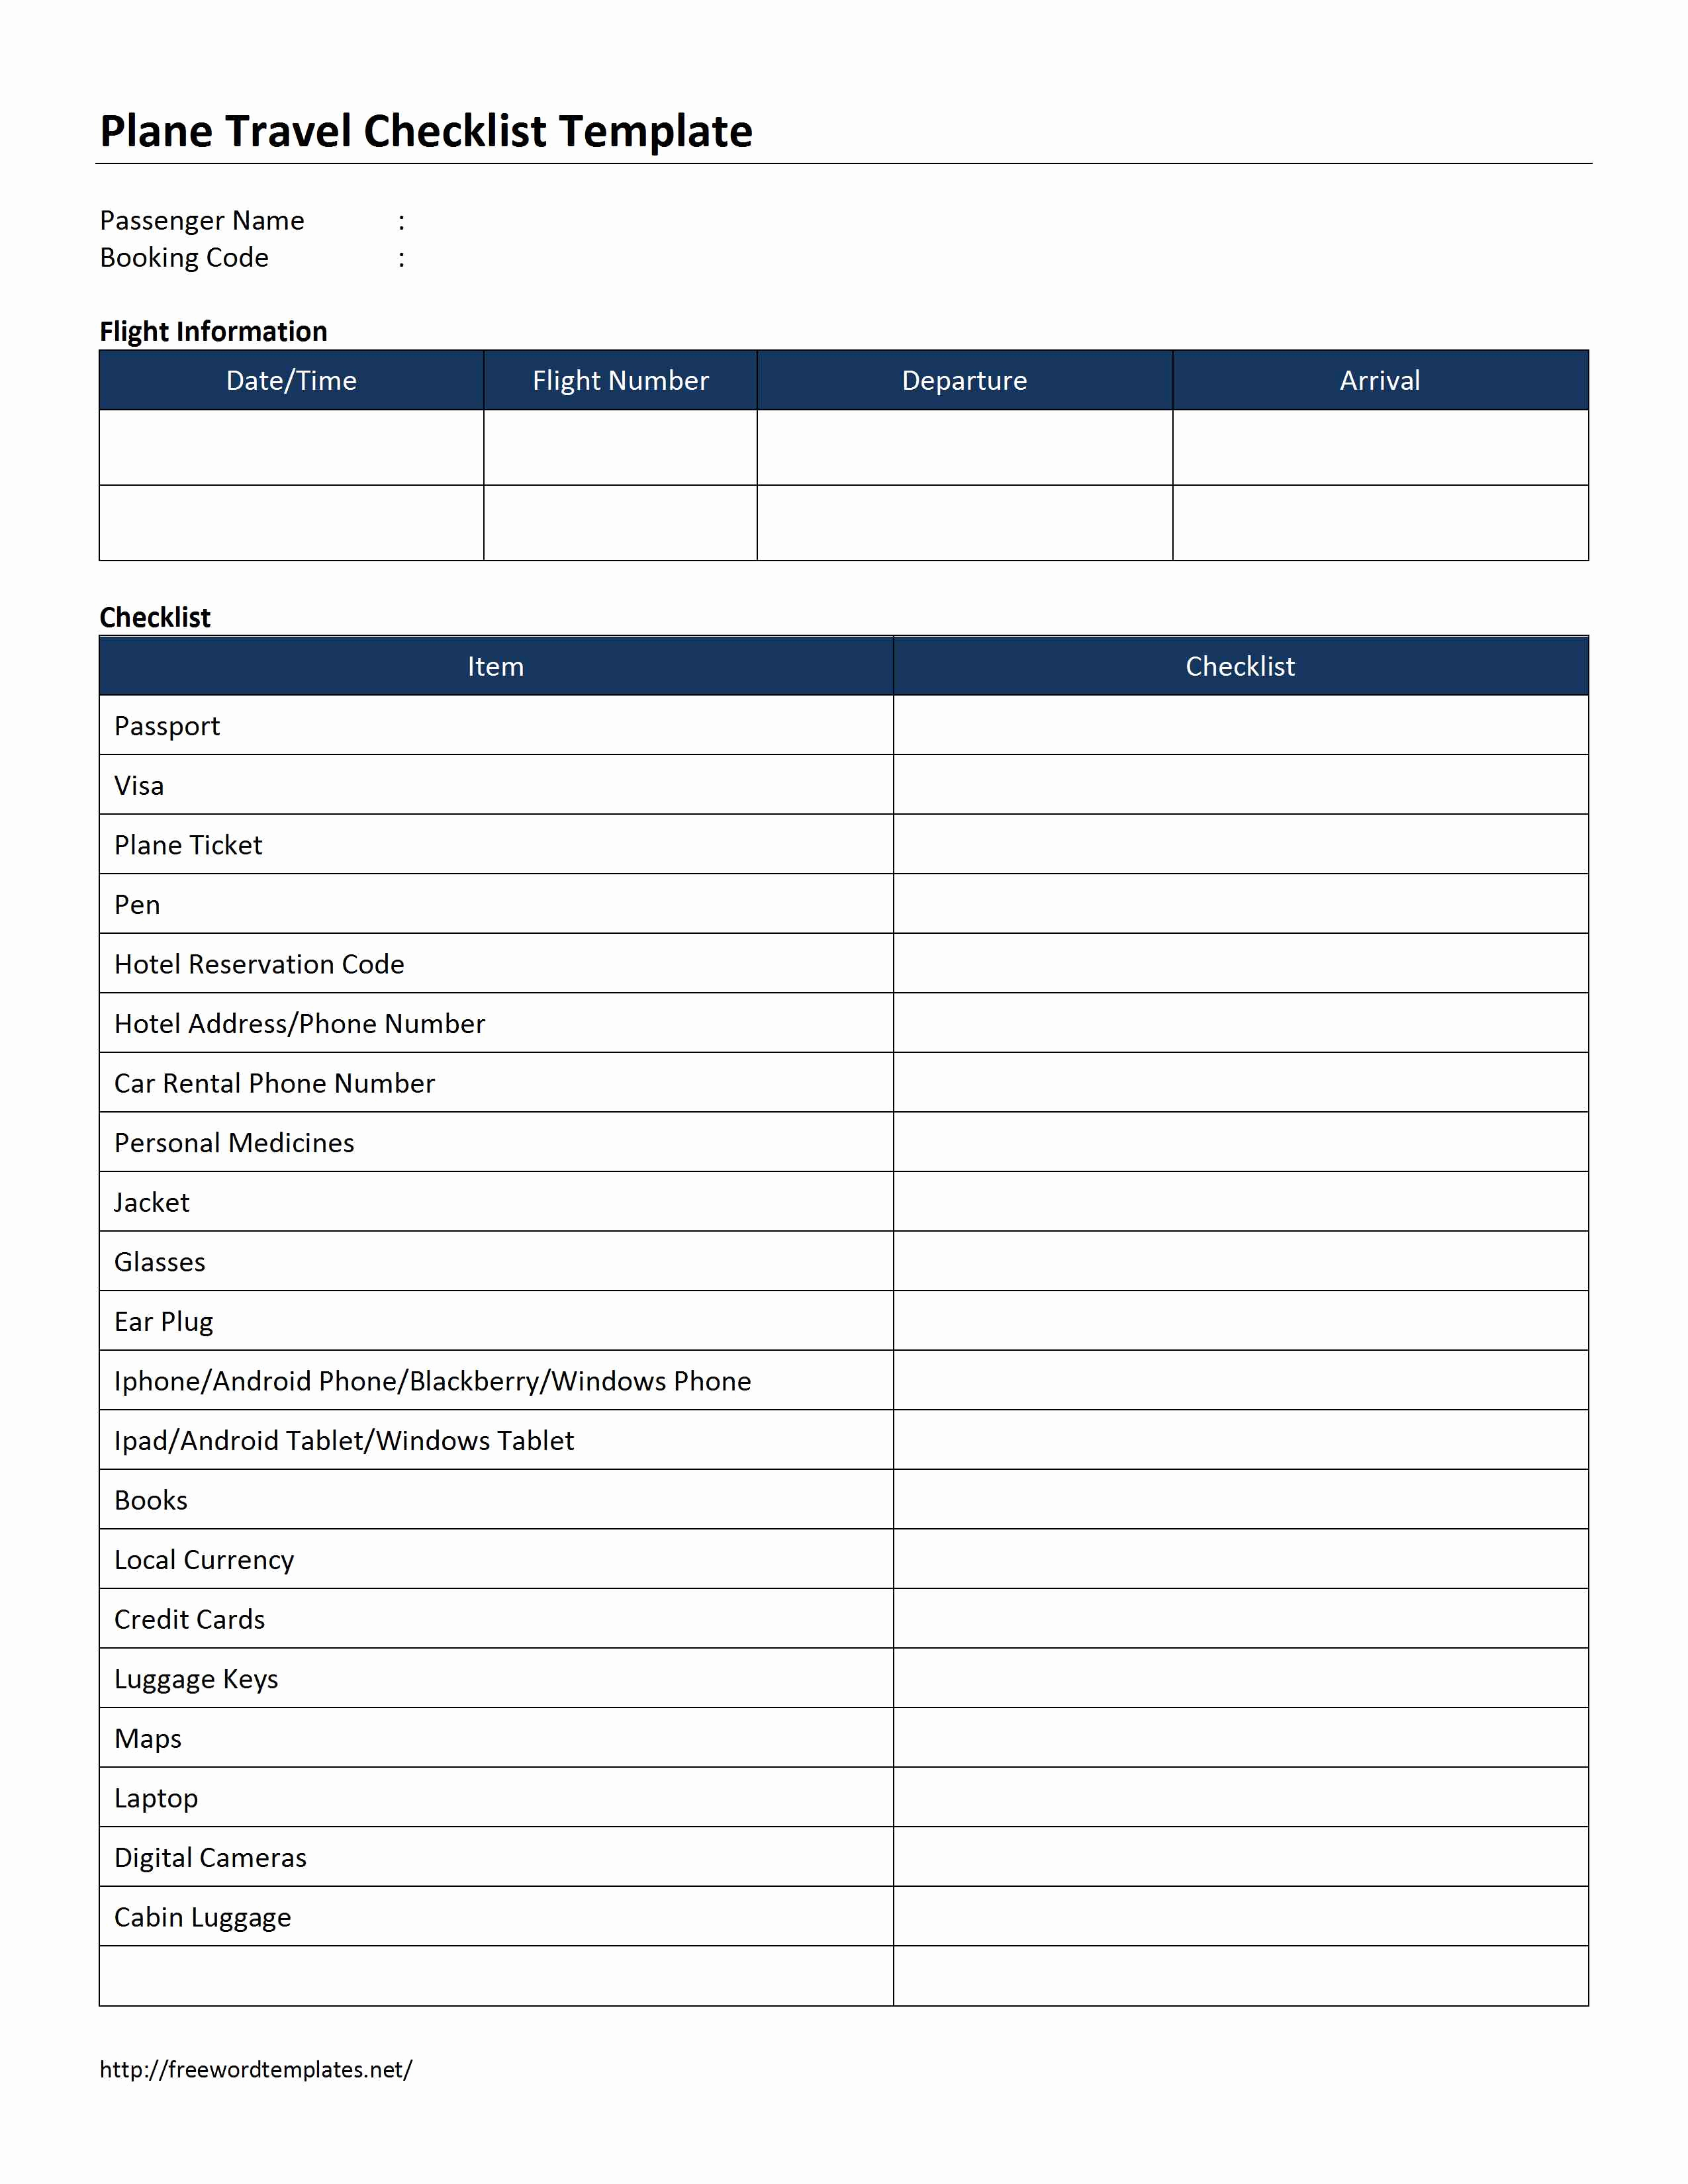 Check Template for Word Fresh Plane Travel Checklist Template